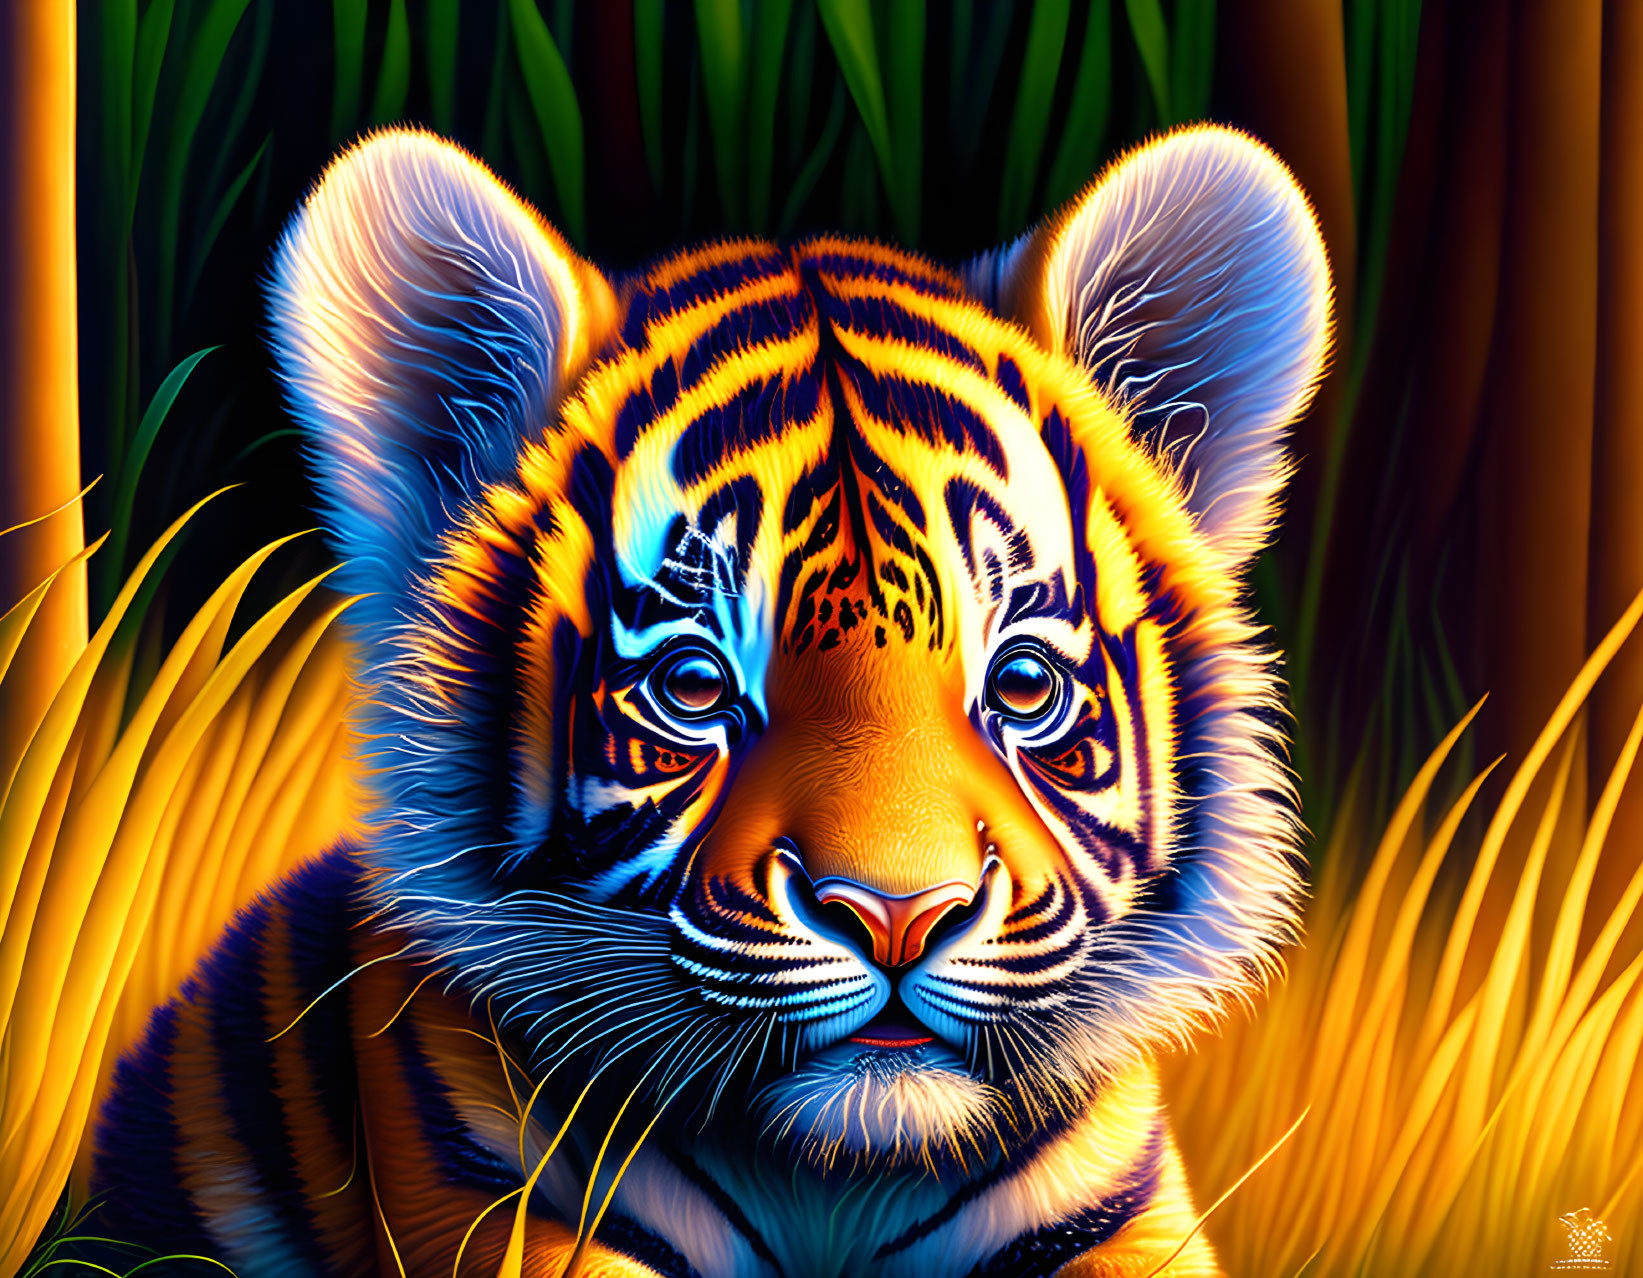 Colorful Tiger Cub Artwork with Vibrant Stripes and Golden Grass Background